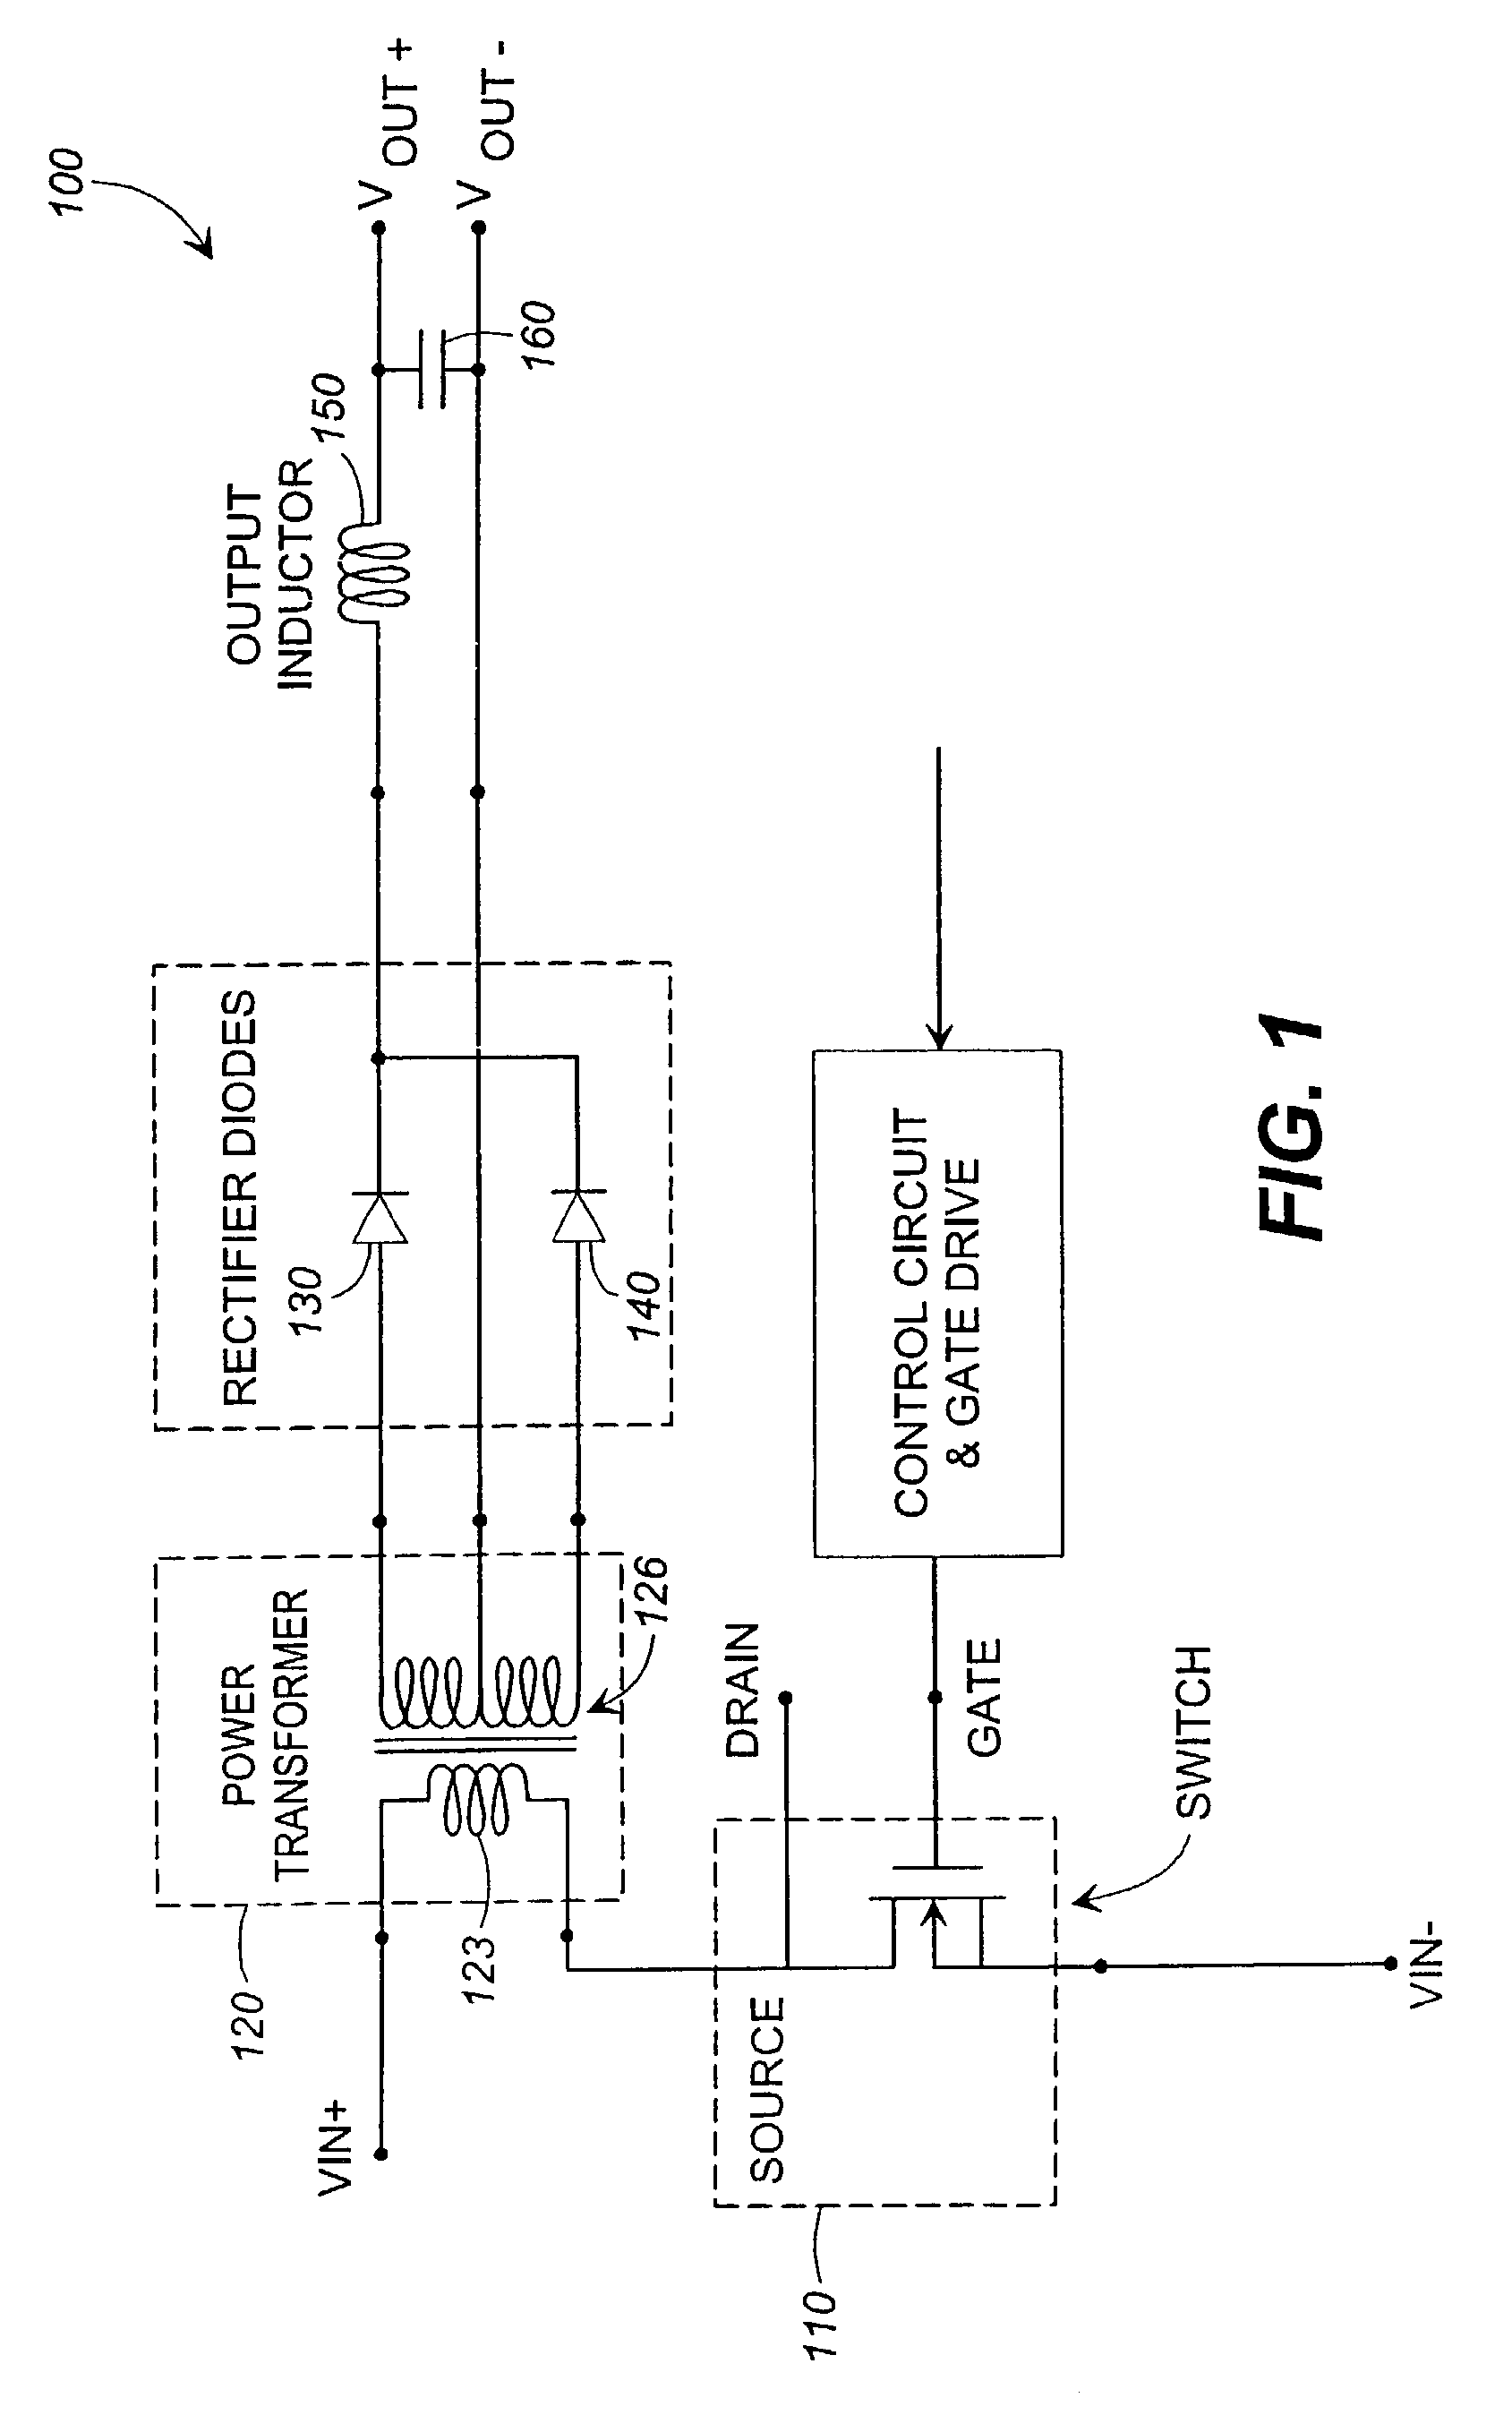 Micromagnetic device for power processing applications and method of manufacture therefor